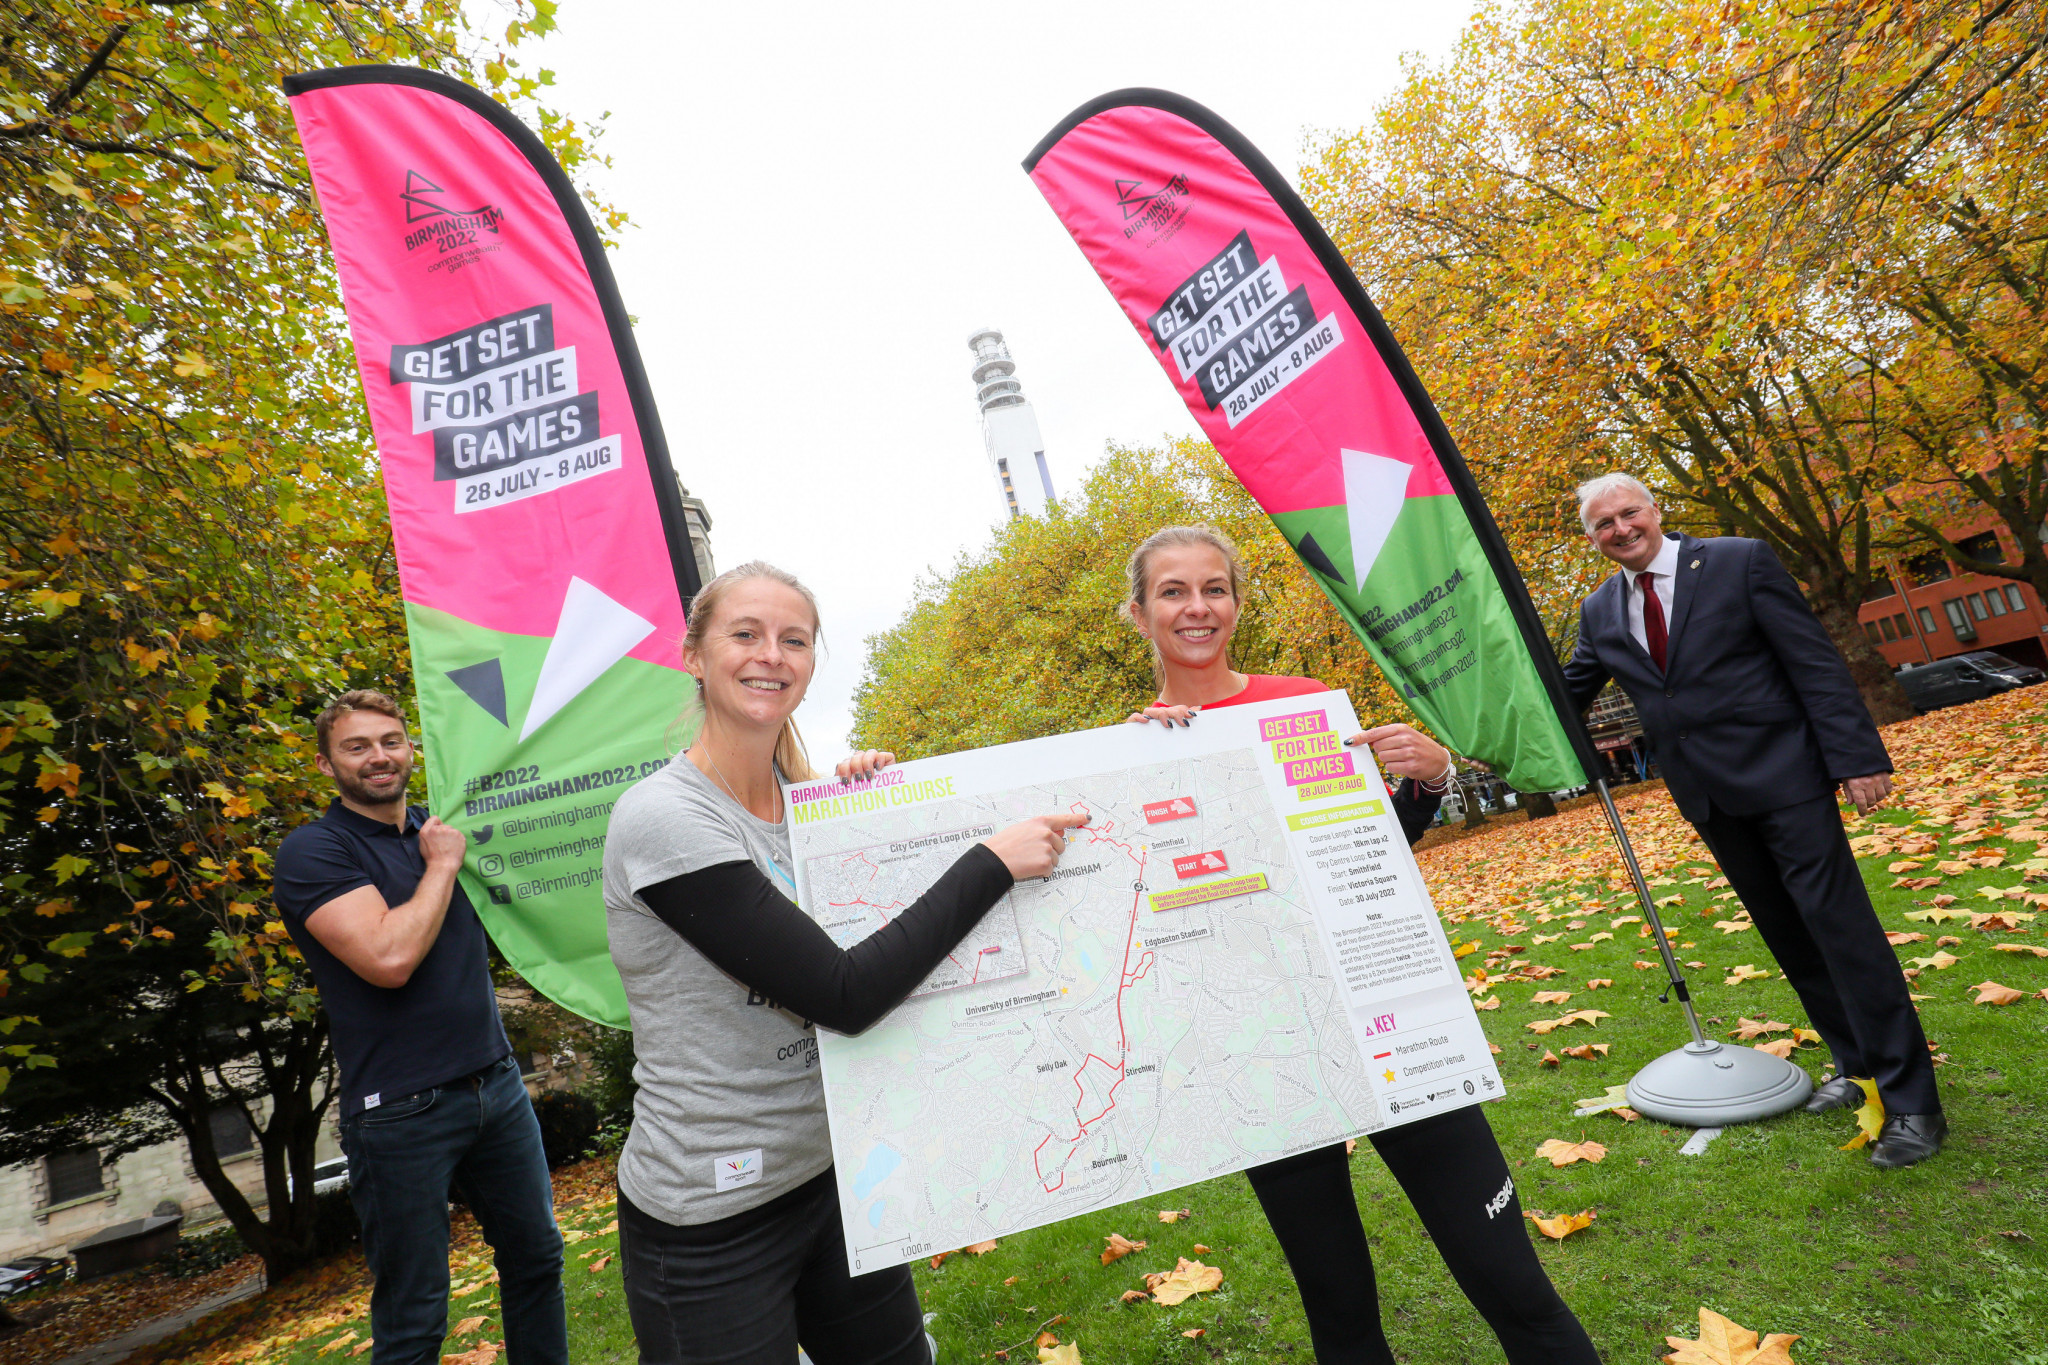 Matt Kidson (left), Hannah England (second left), Hayley Carruthers (second right) and Cllr Ian Ward (right) unveiled the marathon route which includes a 6.2km lap of Birmingham city centre ©Birmingham 2022